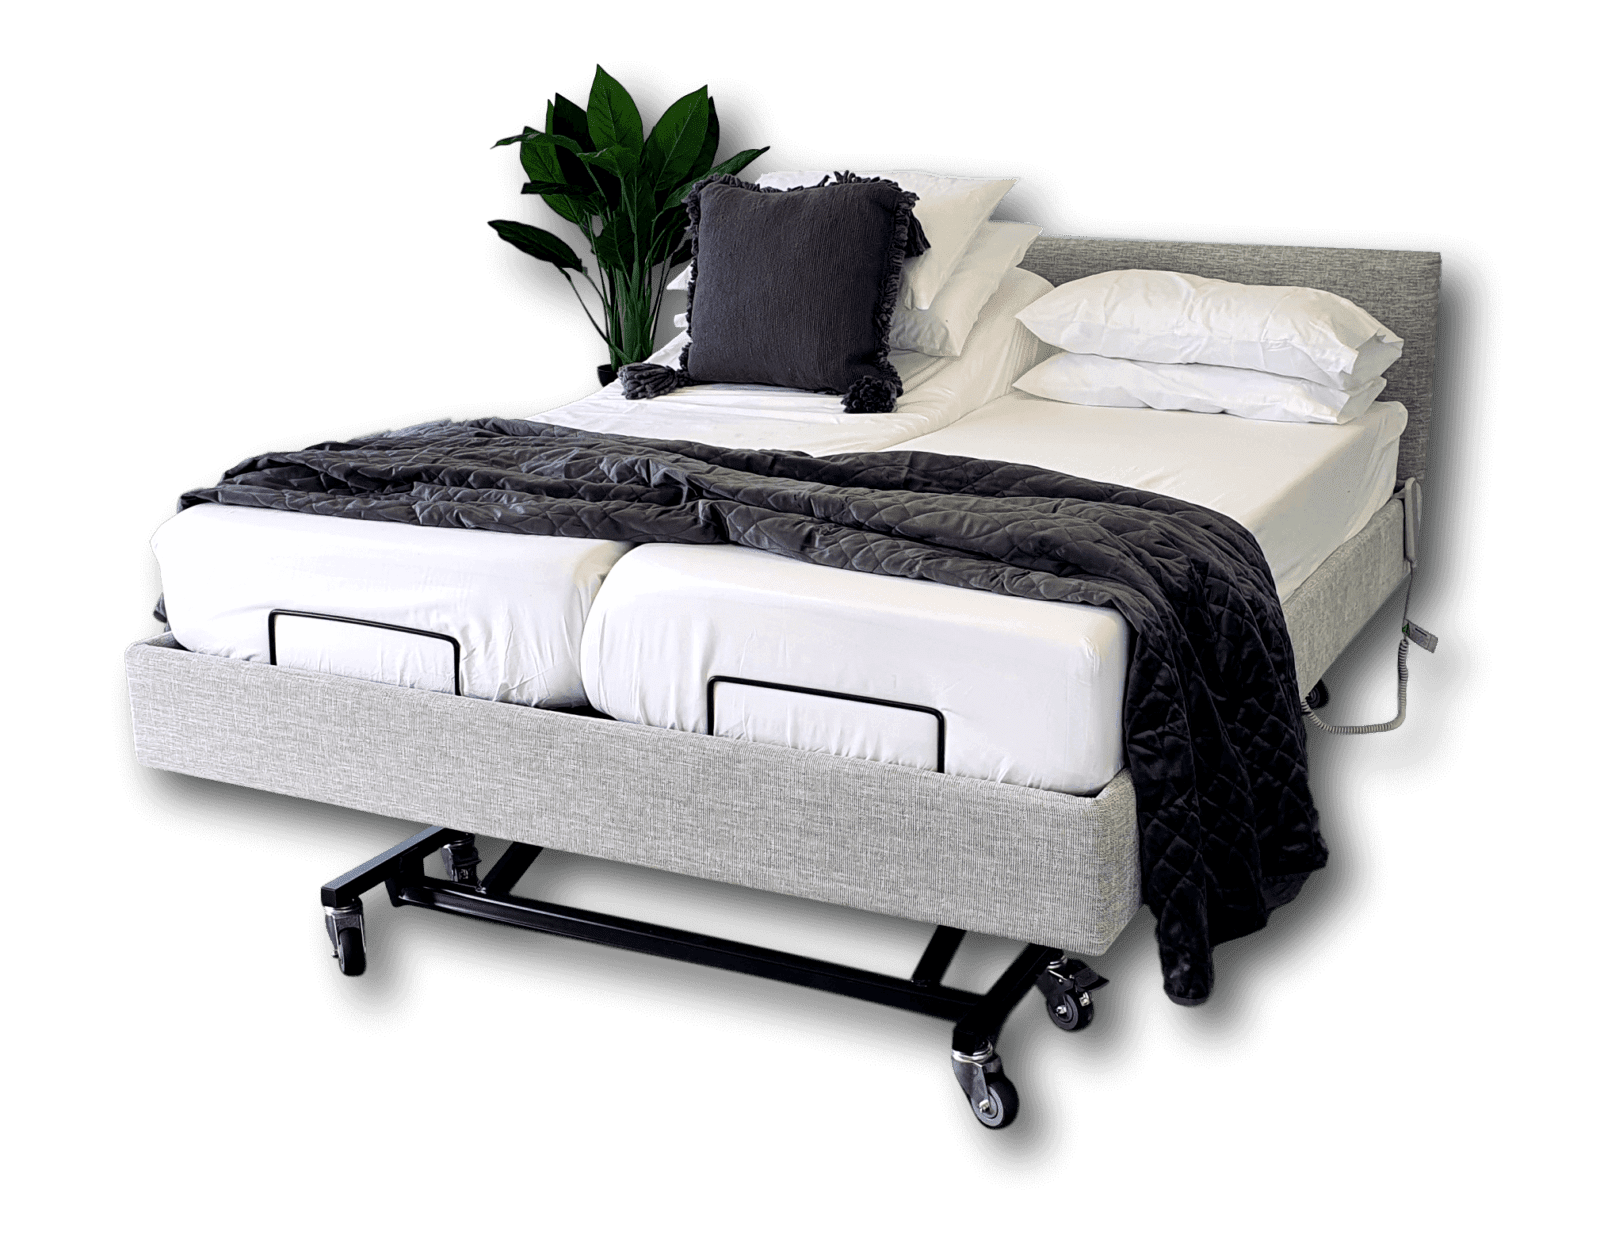 Icare Split Queen Bed Combo Coastcare, Bed And Bed Frame Combo